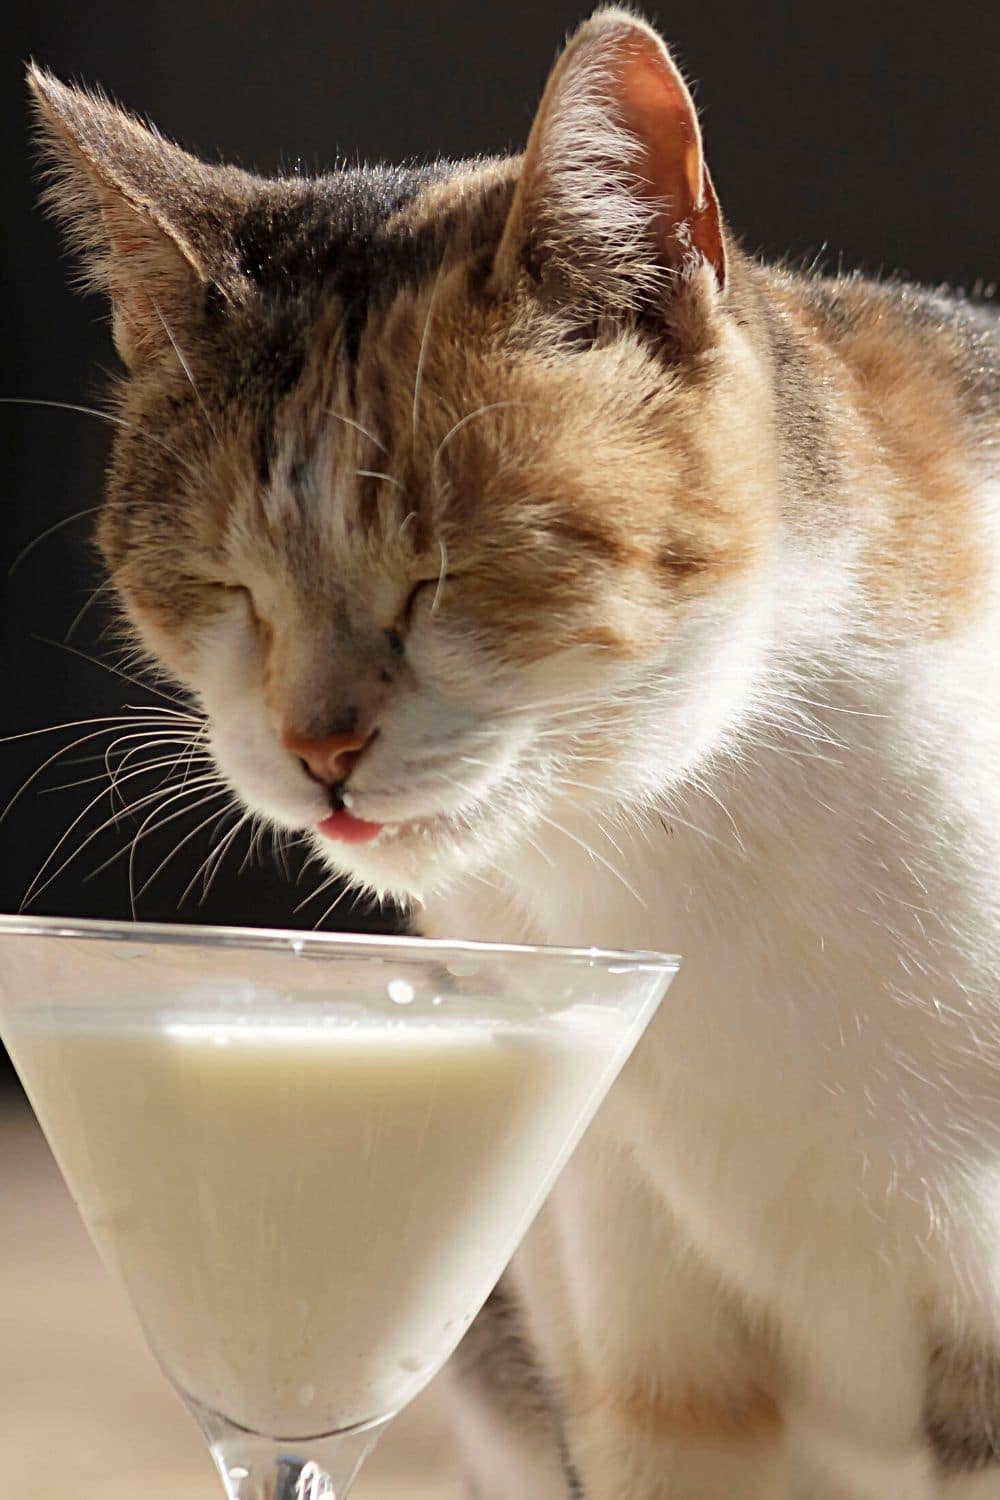 If cats are bored, they can drink milk and eventually groom themselves after